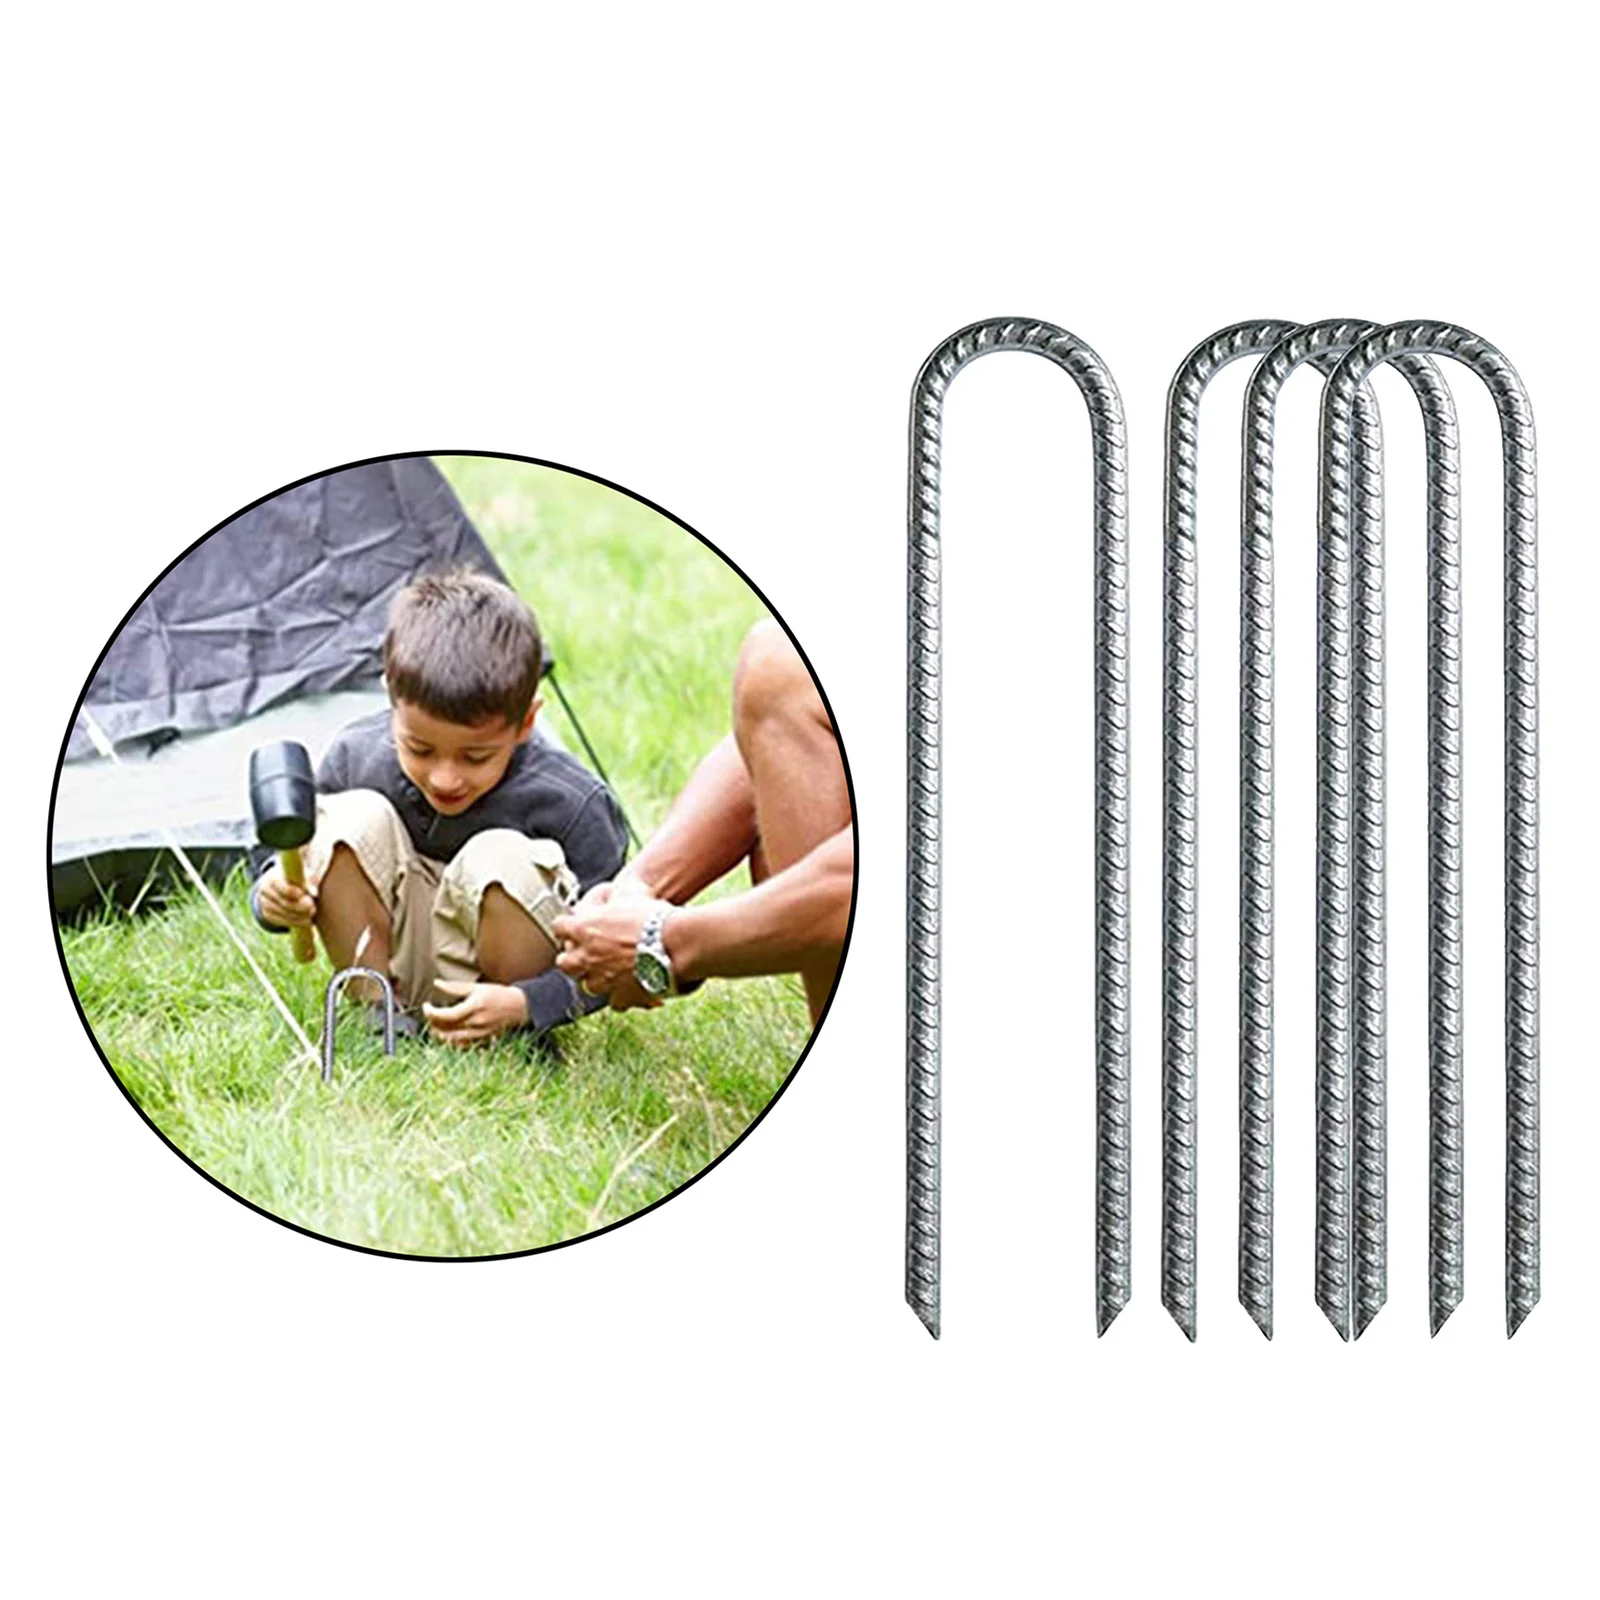 4 Pieces Trampoline Stakes Galvanized Wind Ground Anchors Pegs for Outdoor Swing Bouncy Castles Accessories